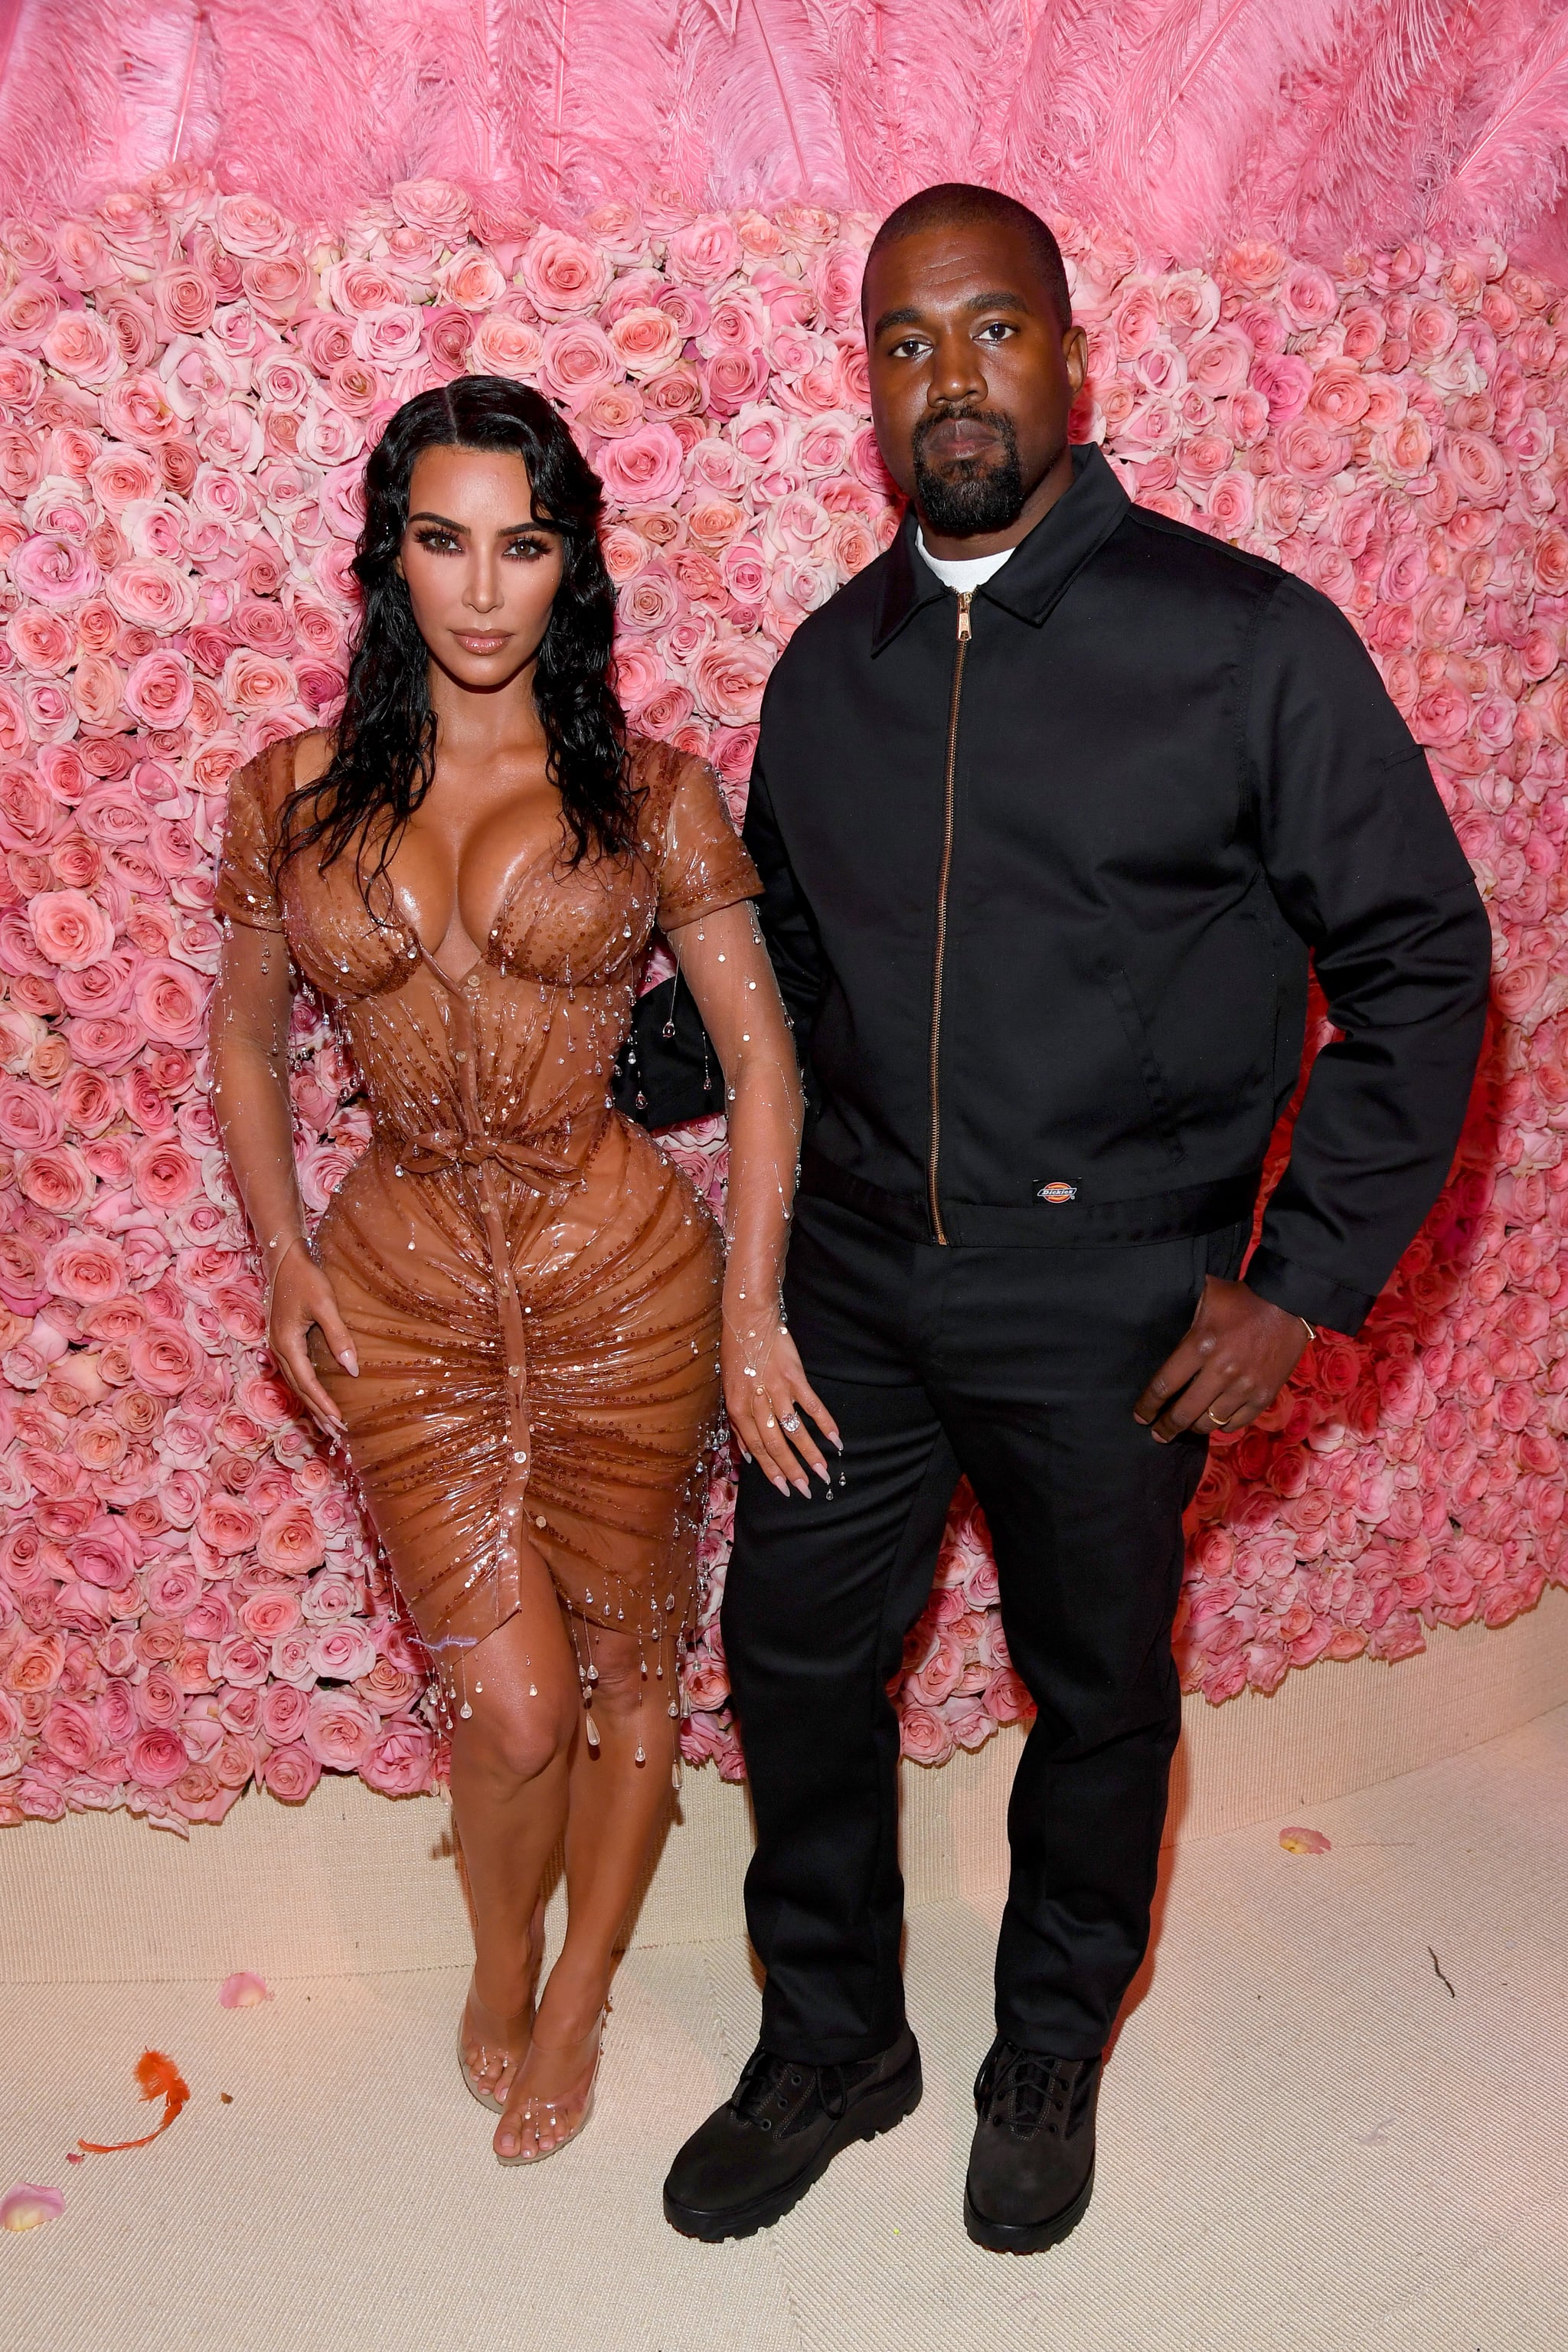 NEW YORK, NEW YORK - MAY 06: Kim Kardashian West and Kanye West attend The 2019 Met Gala Celebrating Camp: Notes on Fashion at Metropolitan Museum of Art on May 06, 2019 in New York City. (Photo by Kevin Mazur/MG19/Getty Images for The Met Museum/Vogue)